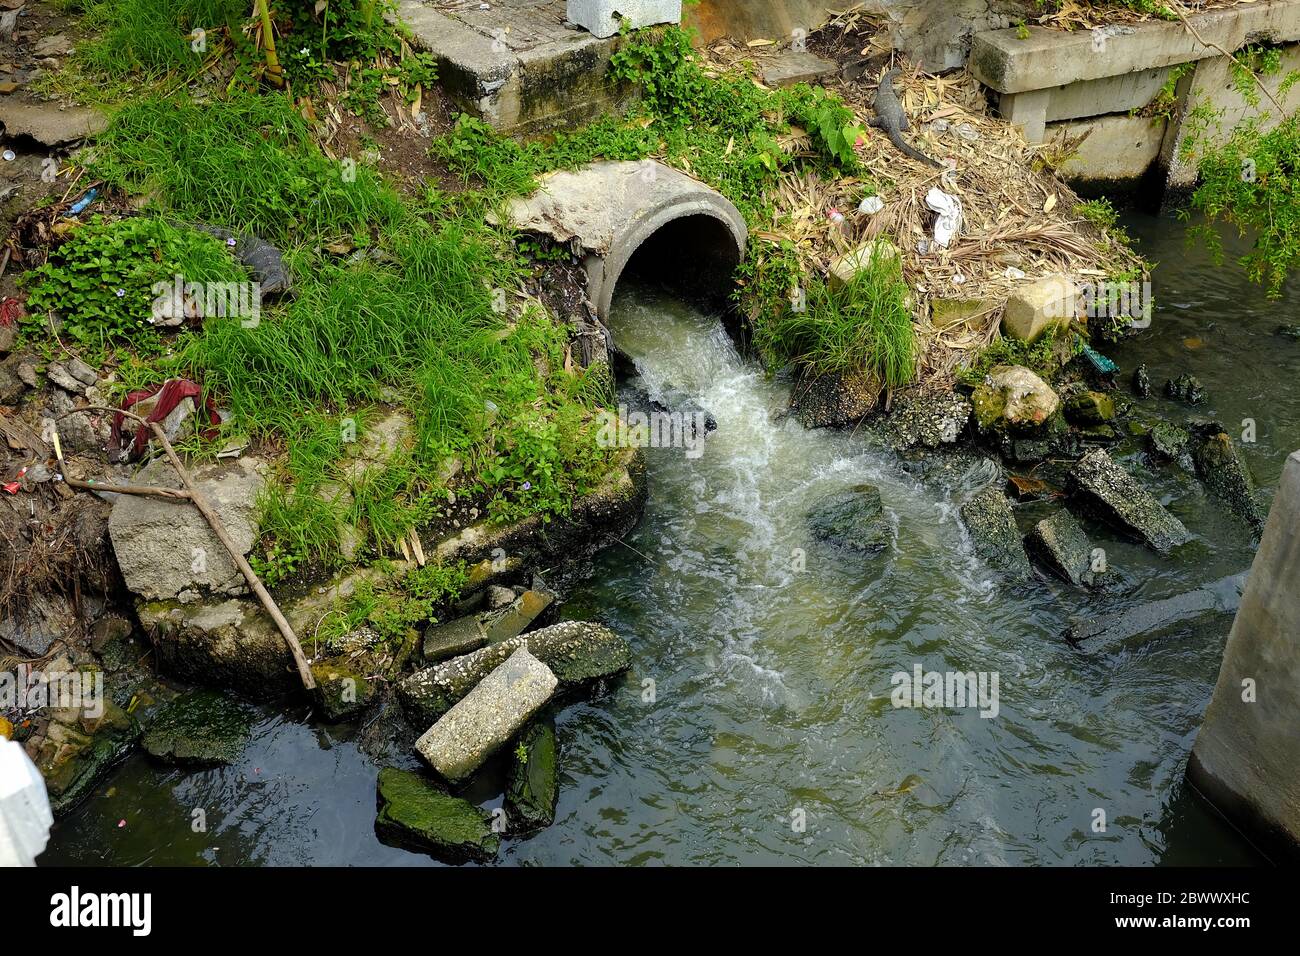 Wastewater Flows from Sewer to Canal, Environmental Degradation Concept. Stock Photo